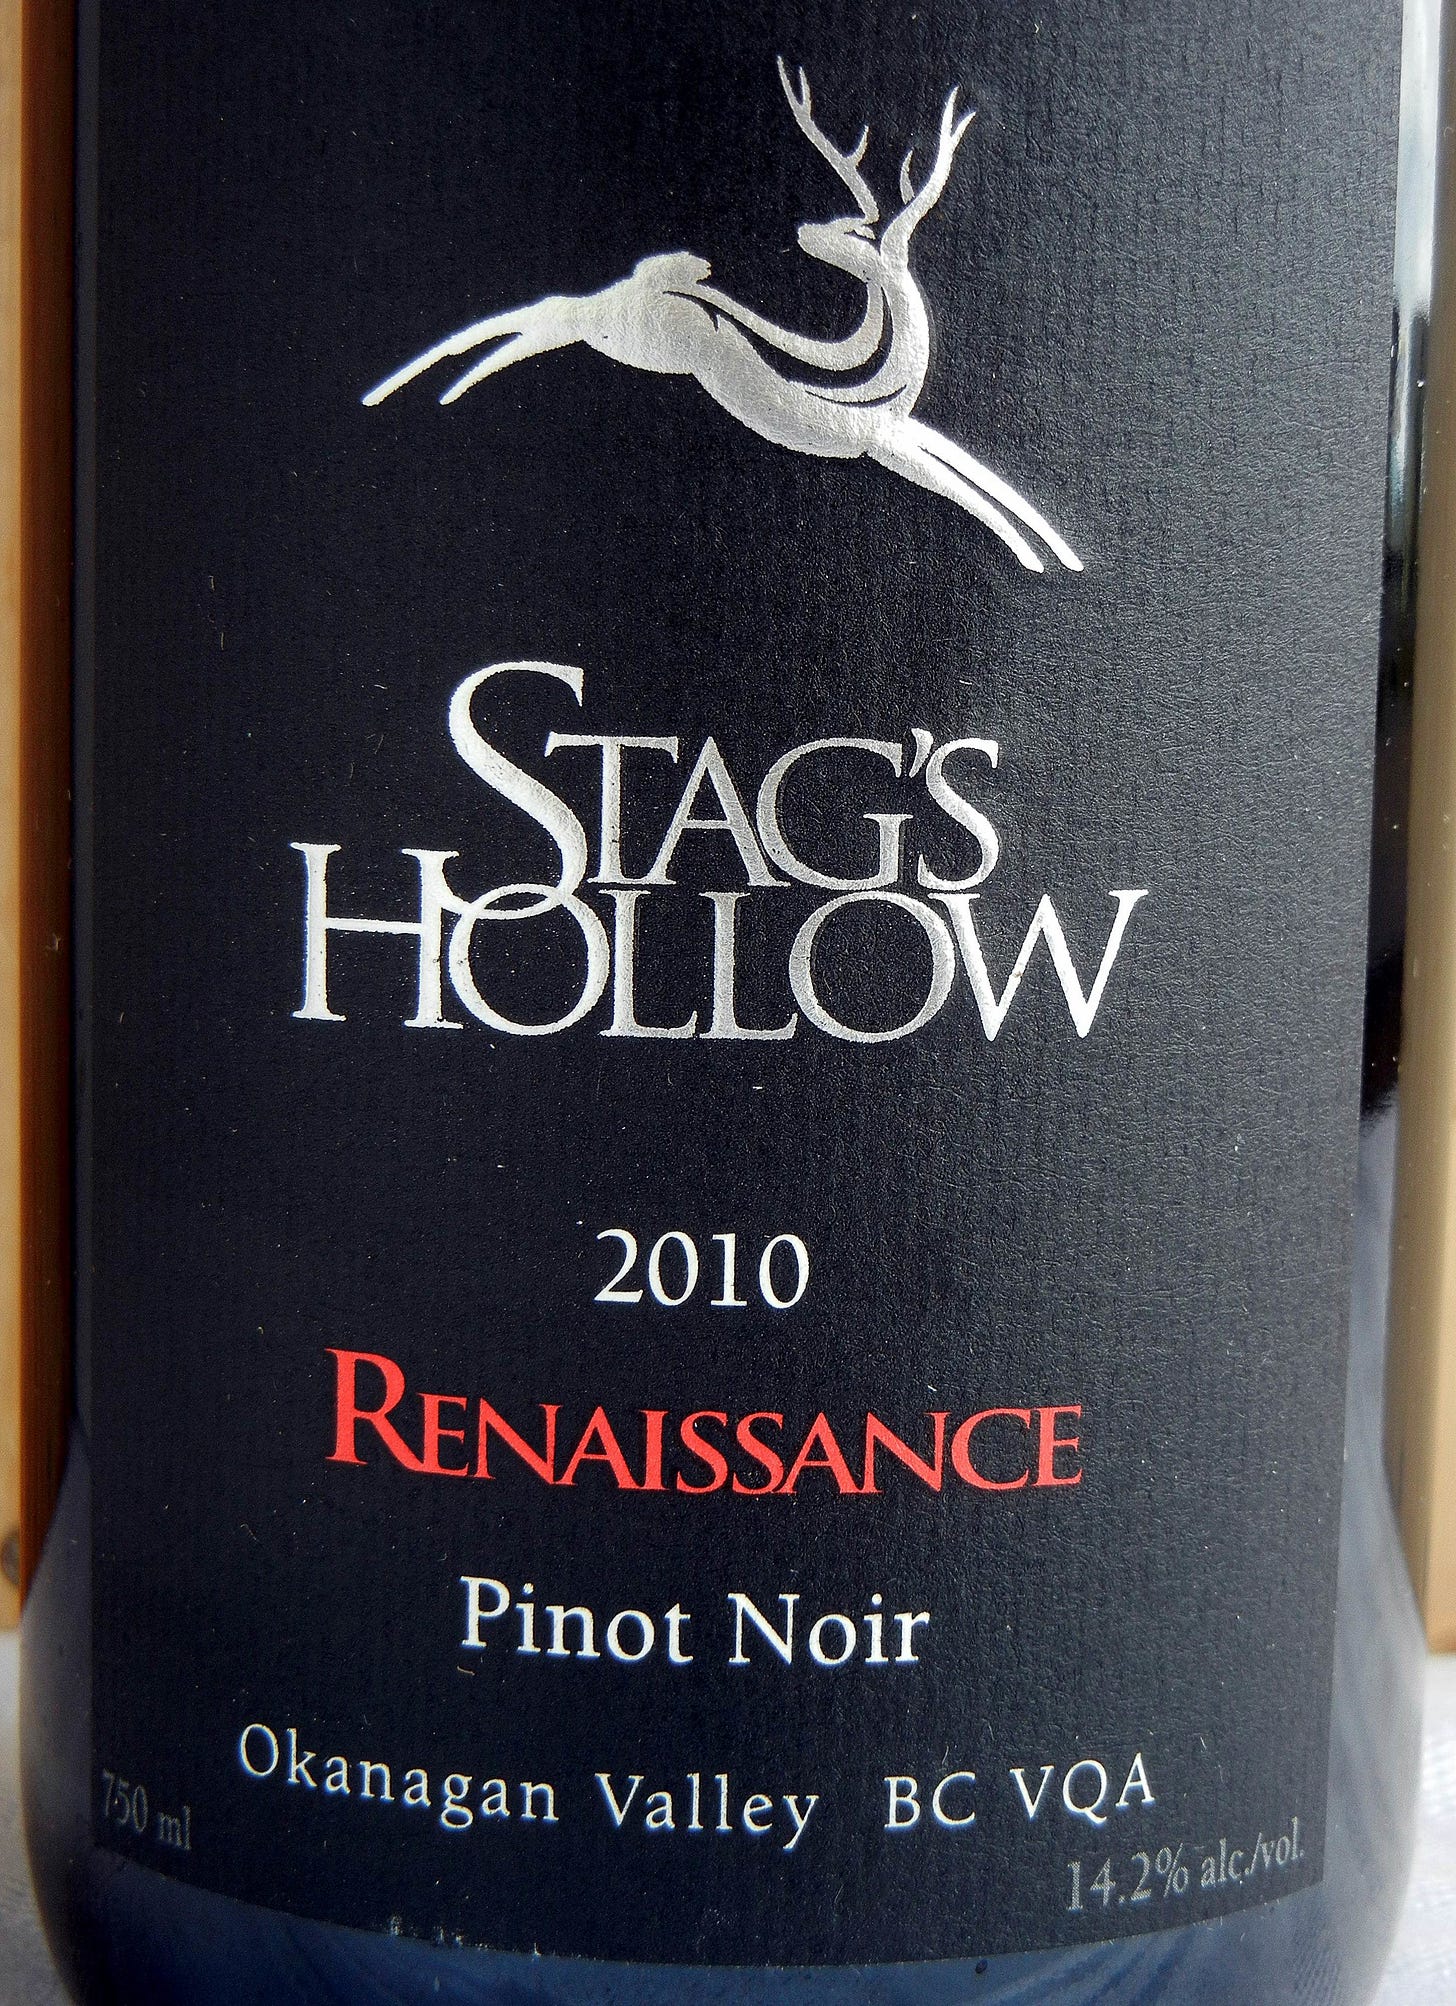 Stag's Hollow Renaissance Pinot Noir 2010 Label - BC Pinot Noir Tasting Review 14